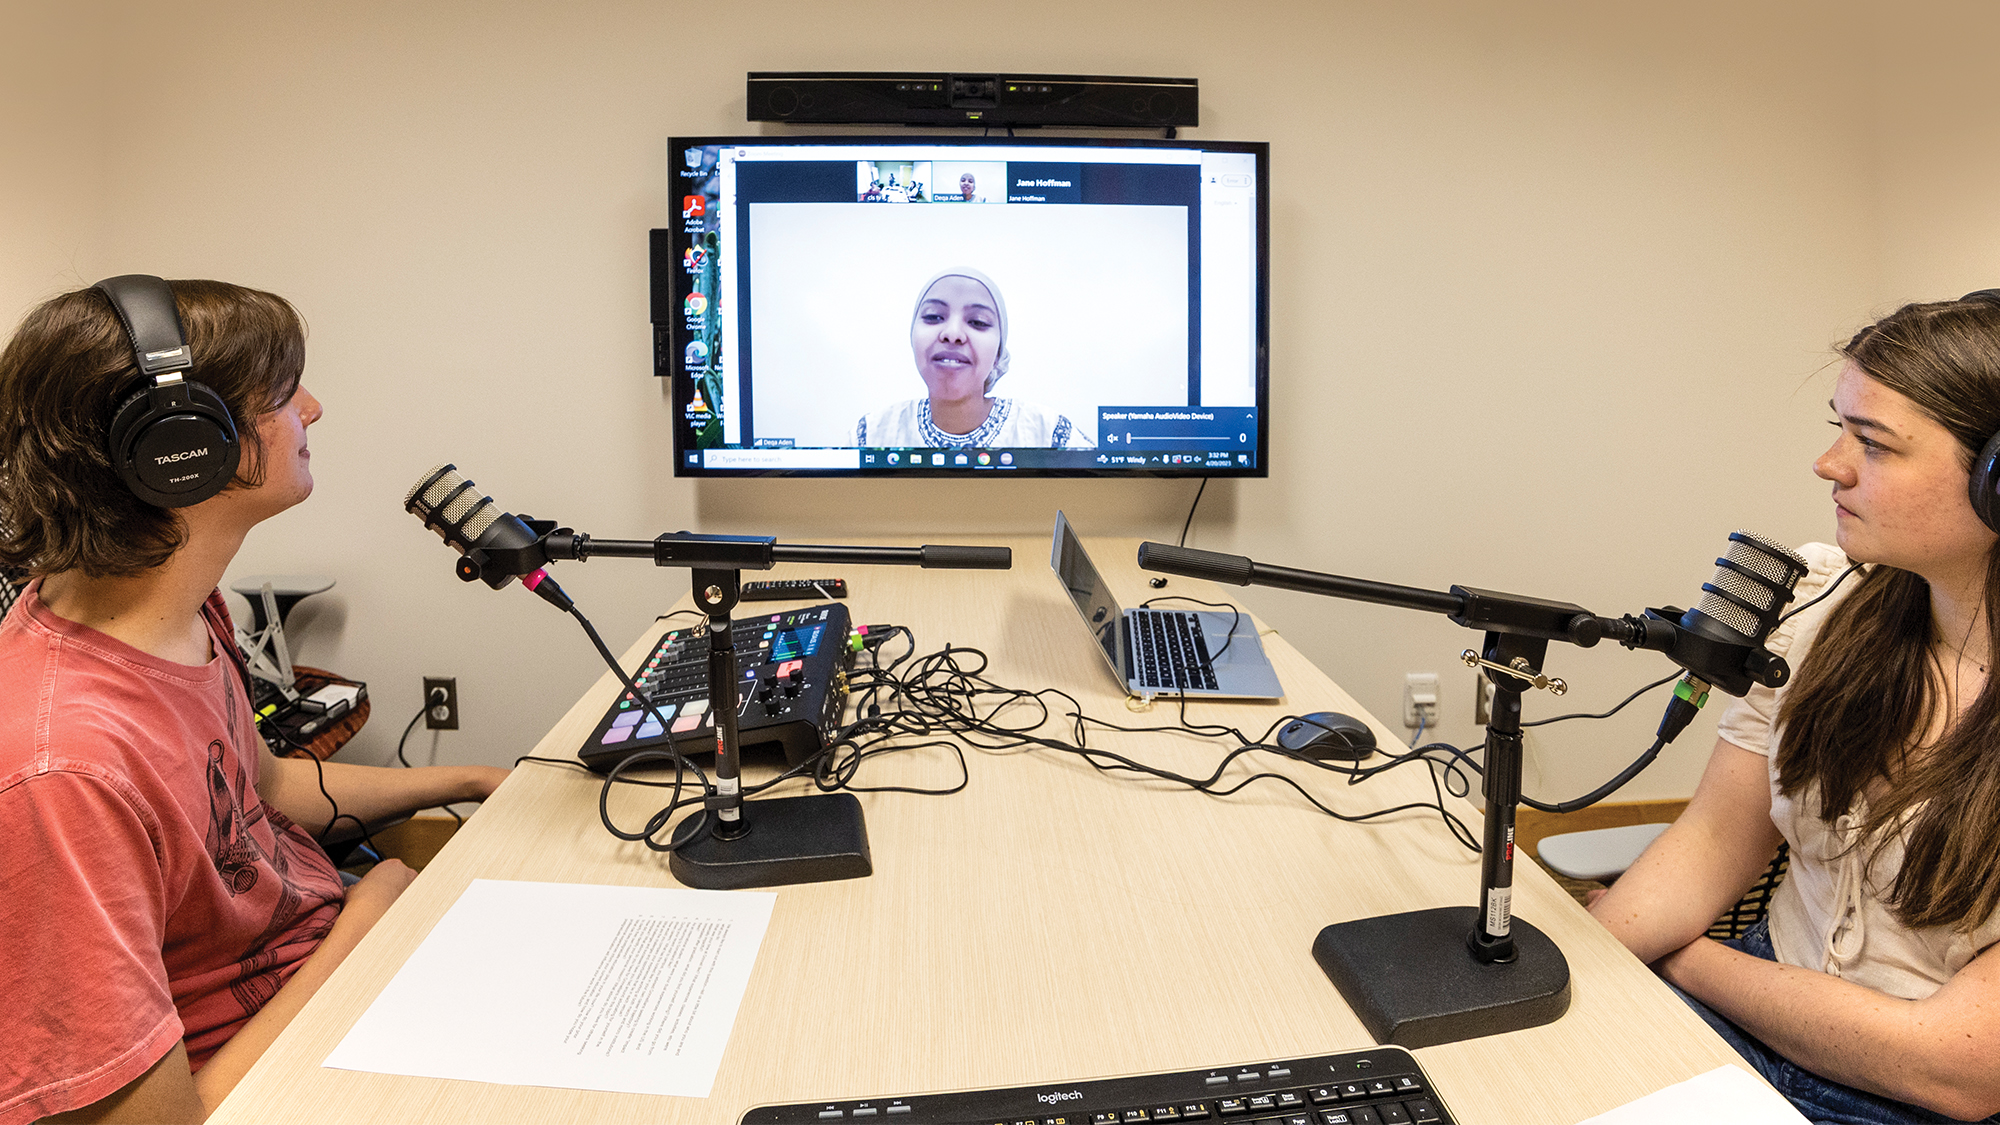 2 people with head- and microphones are facing a monitor that displays an online meeting